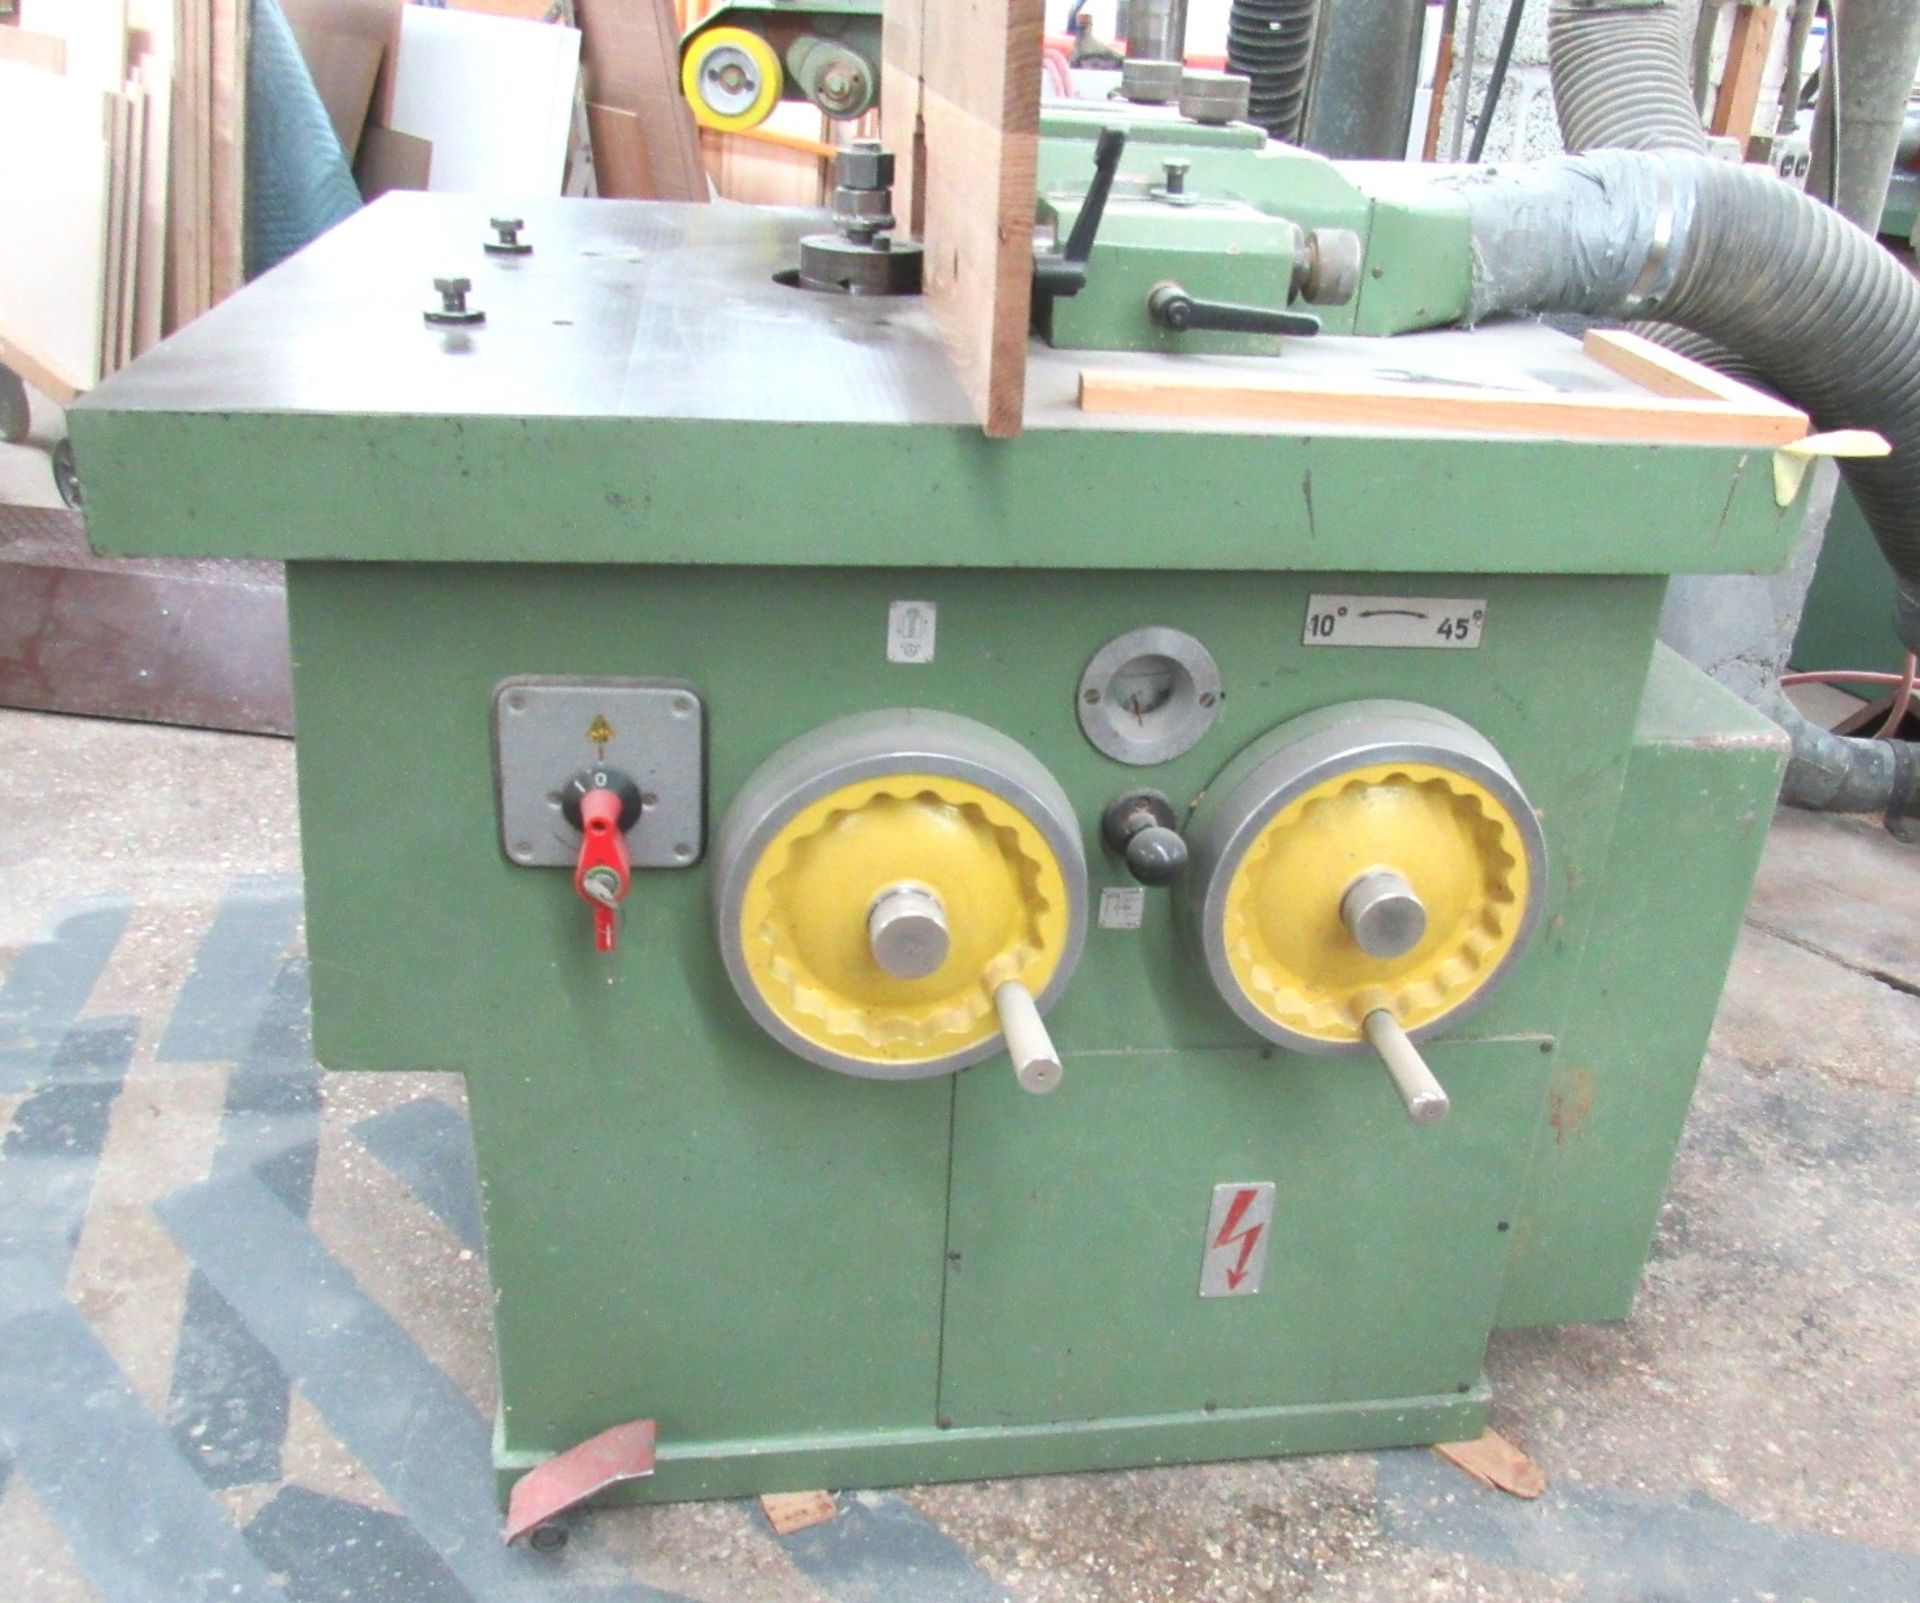 Gomad Mod. DFFA-5 Shaper - Variable Speed 4000 - 10,000 RPM, 1.25" Spindle Dia., Tilting Arbor, - Image 2 of 5